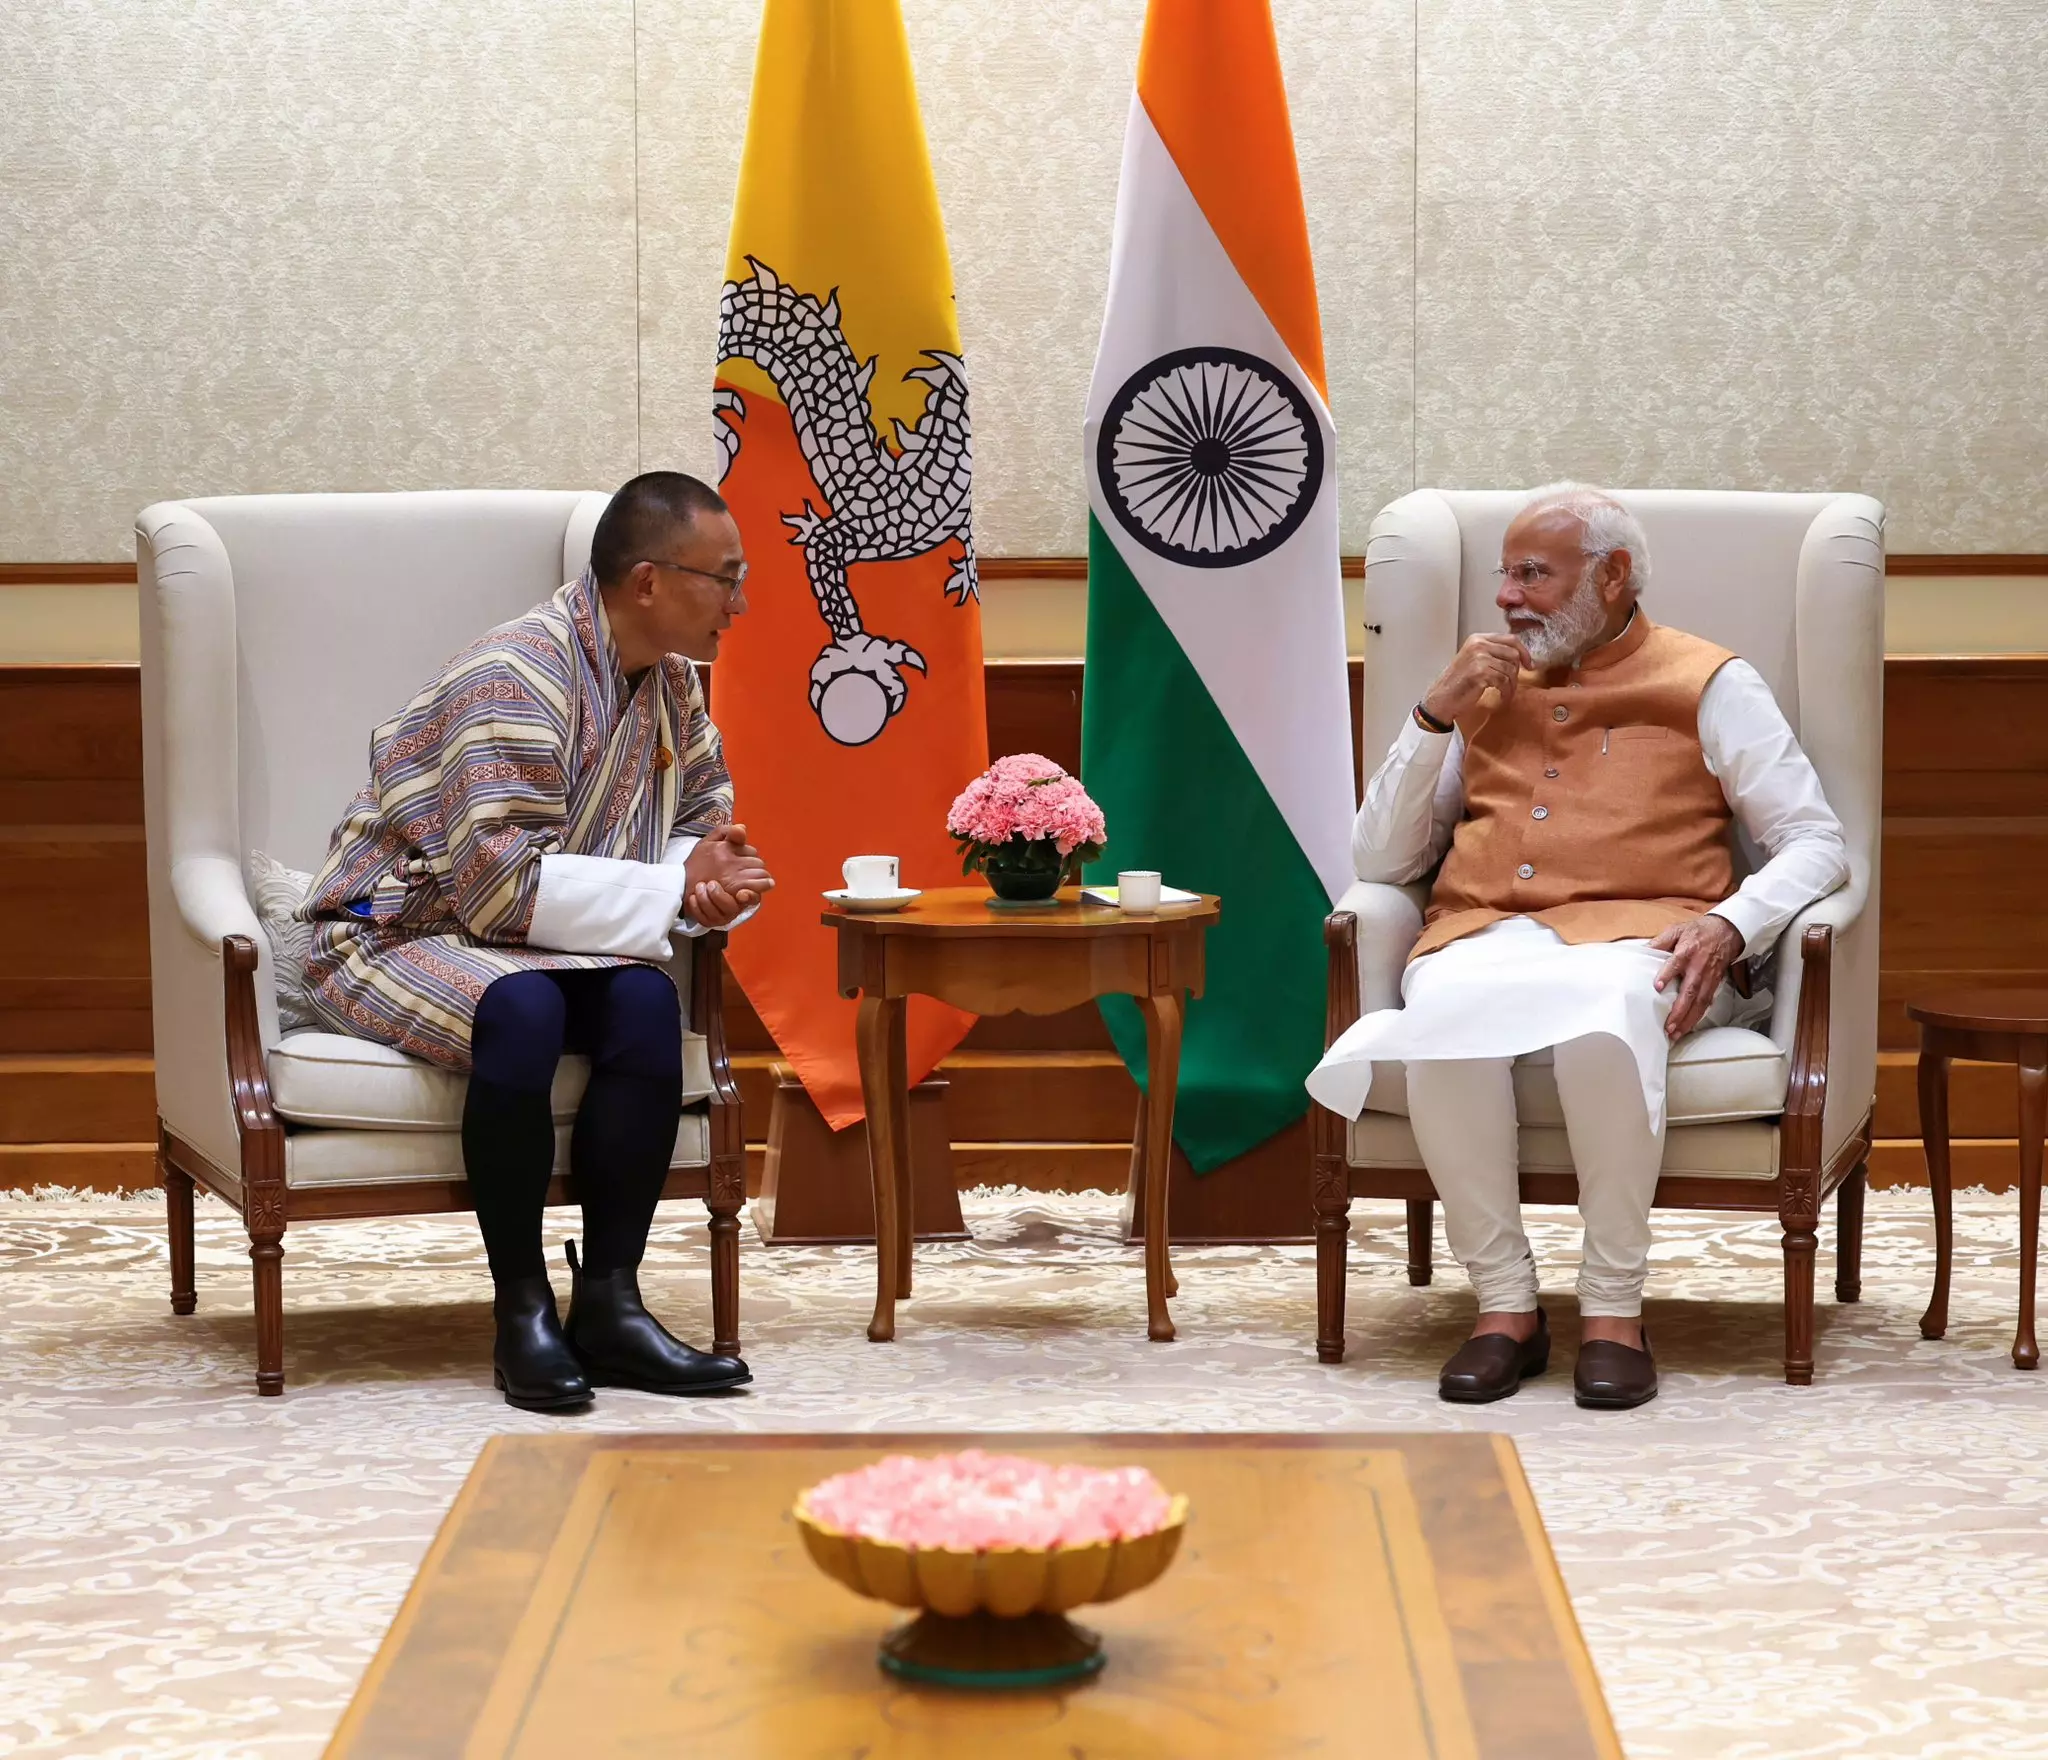 India is reliable, trusted partner of Bhutan: Bhutanese PM Tobgay